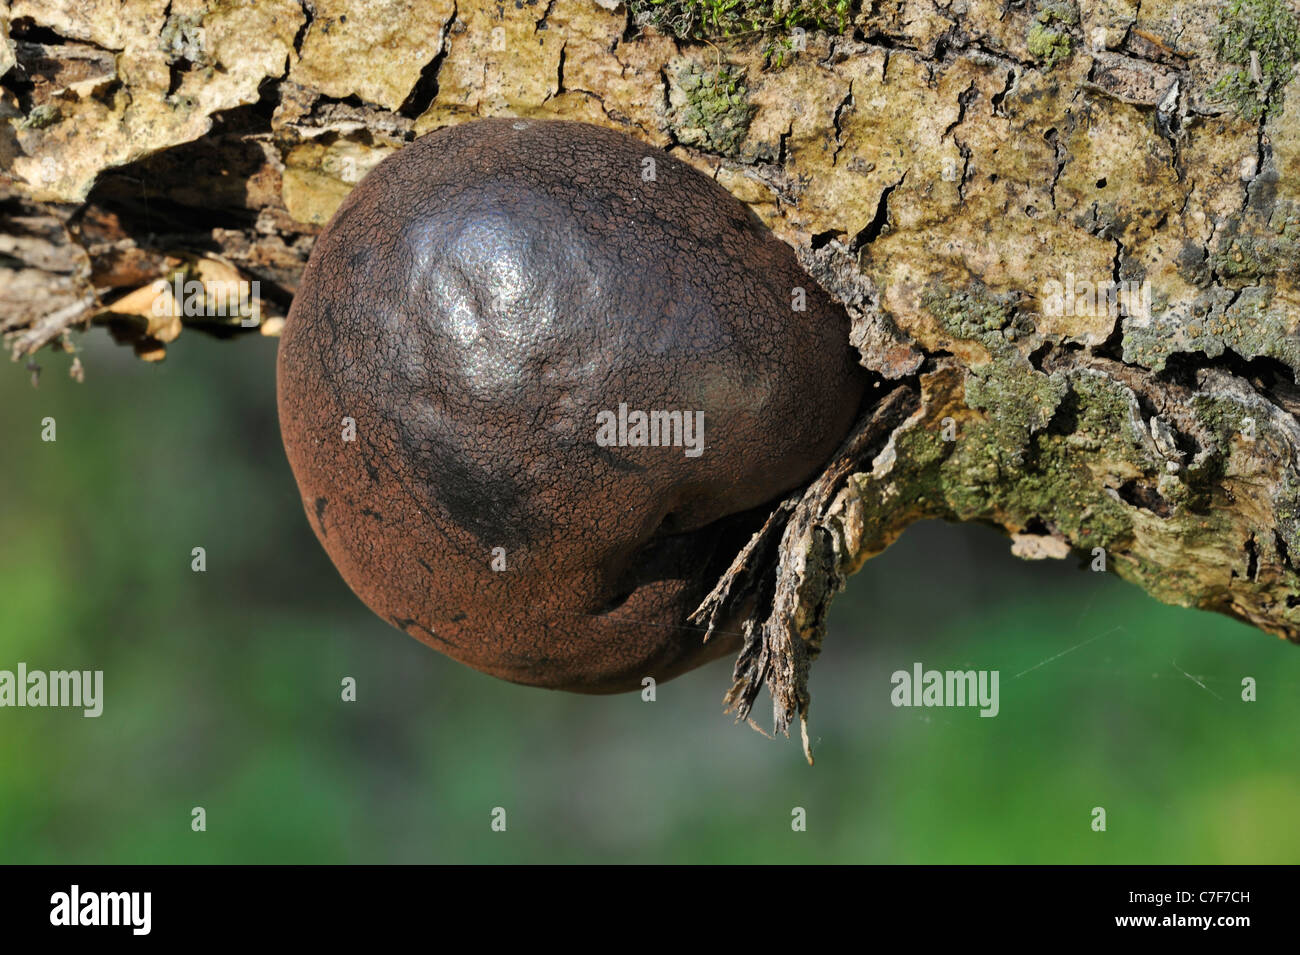 King Alfred's Cake / Cramp balls / Coal fungus (Daldinia concentrica) growing from tree trunk Stock Photo